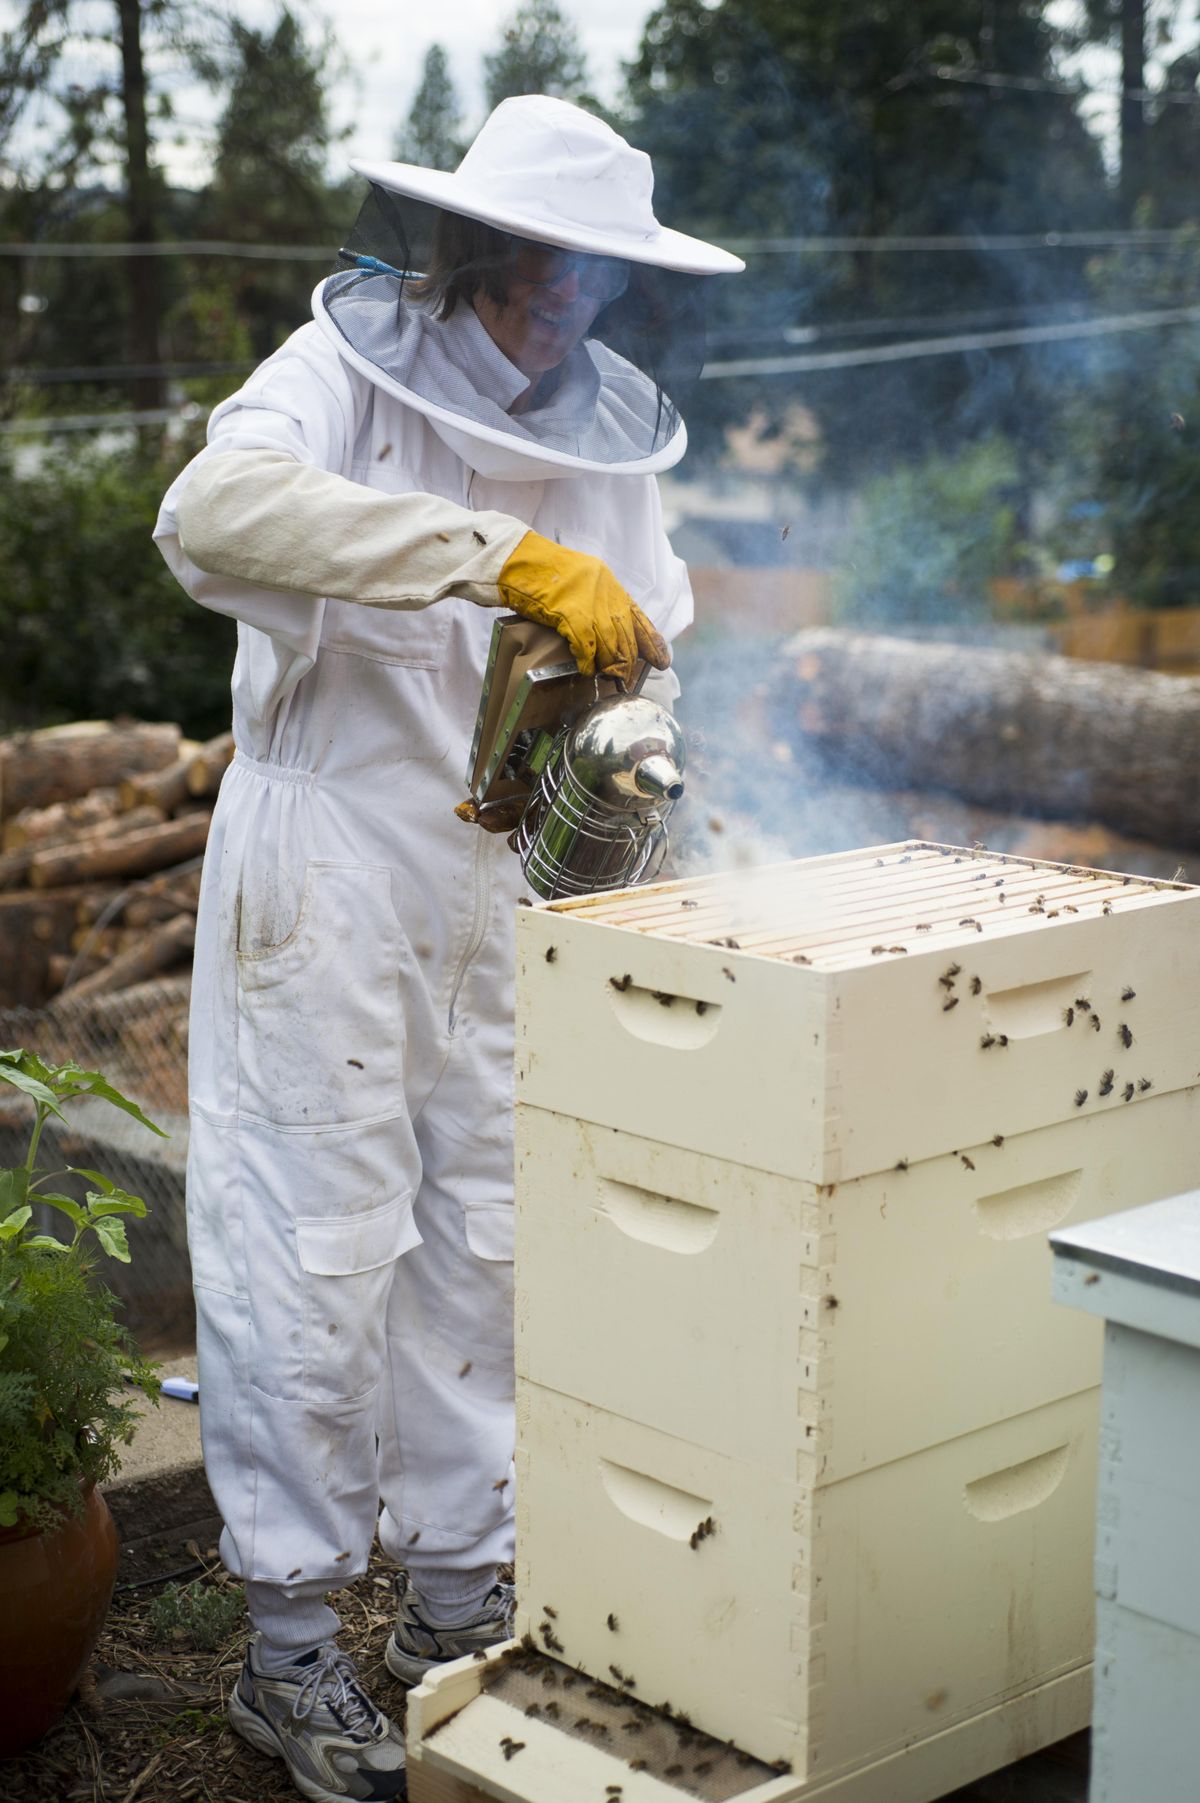 Home beekeeper Bethe Bowman uses a smoker to calm her honeybees as she inspects her backyard hive. “I think it’s important that you help Mother Nature. I think we owe it to the bees,” she said. (Colin Mulvany / The Spokesman-Review)